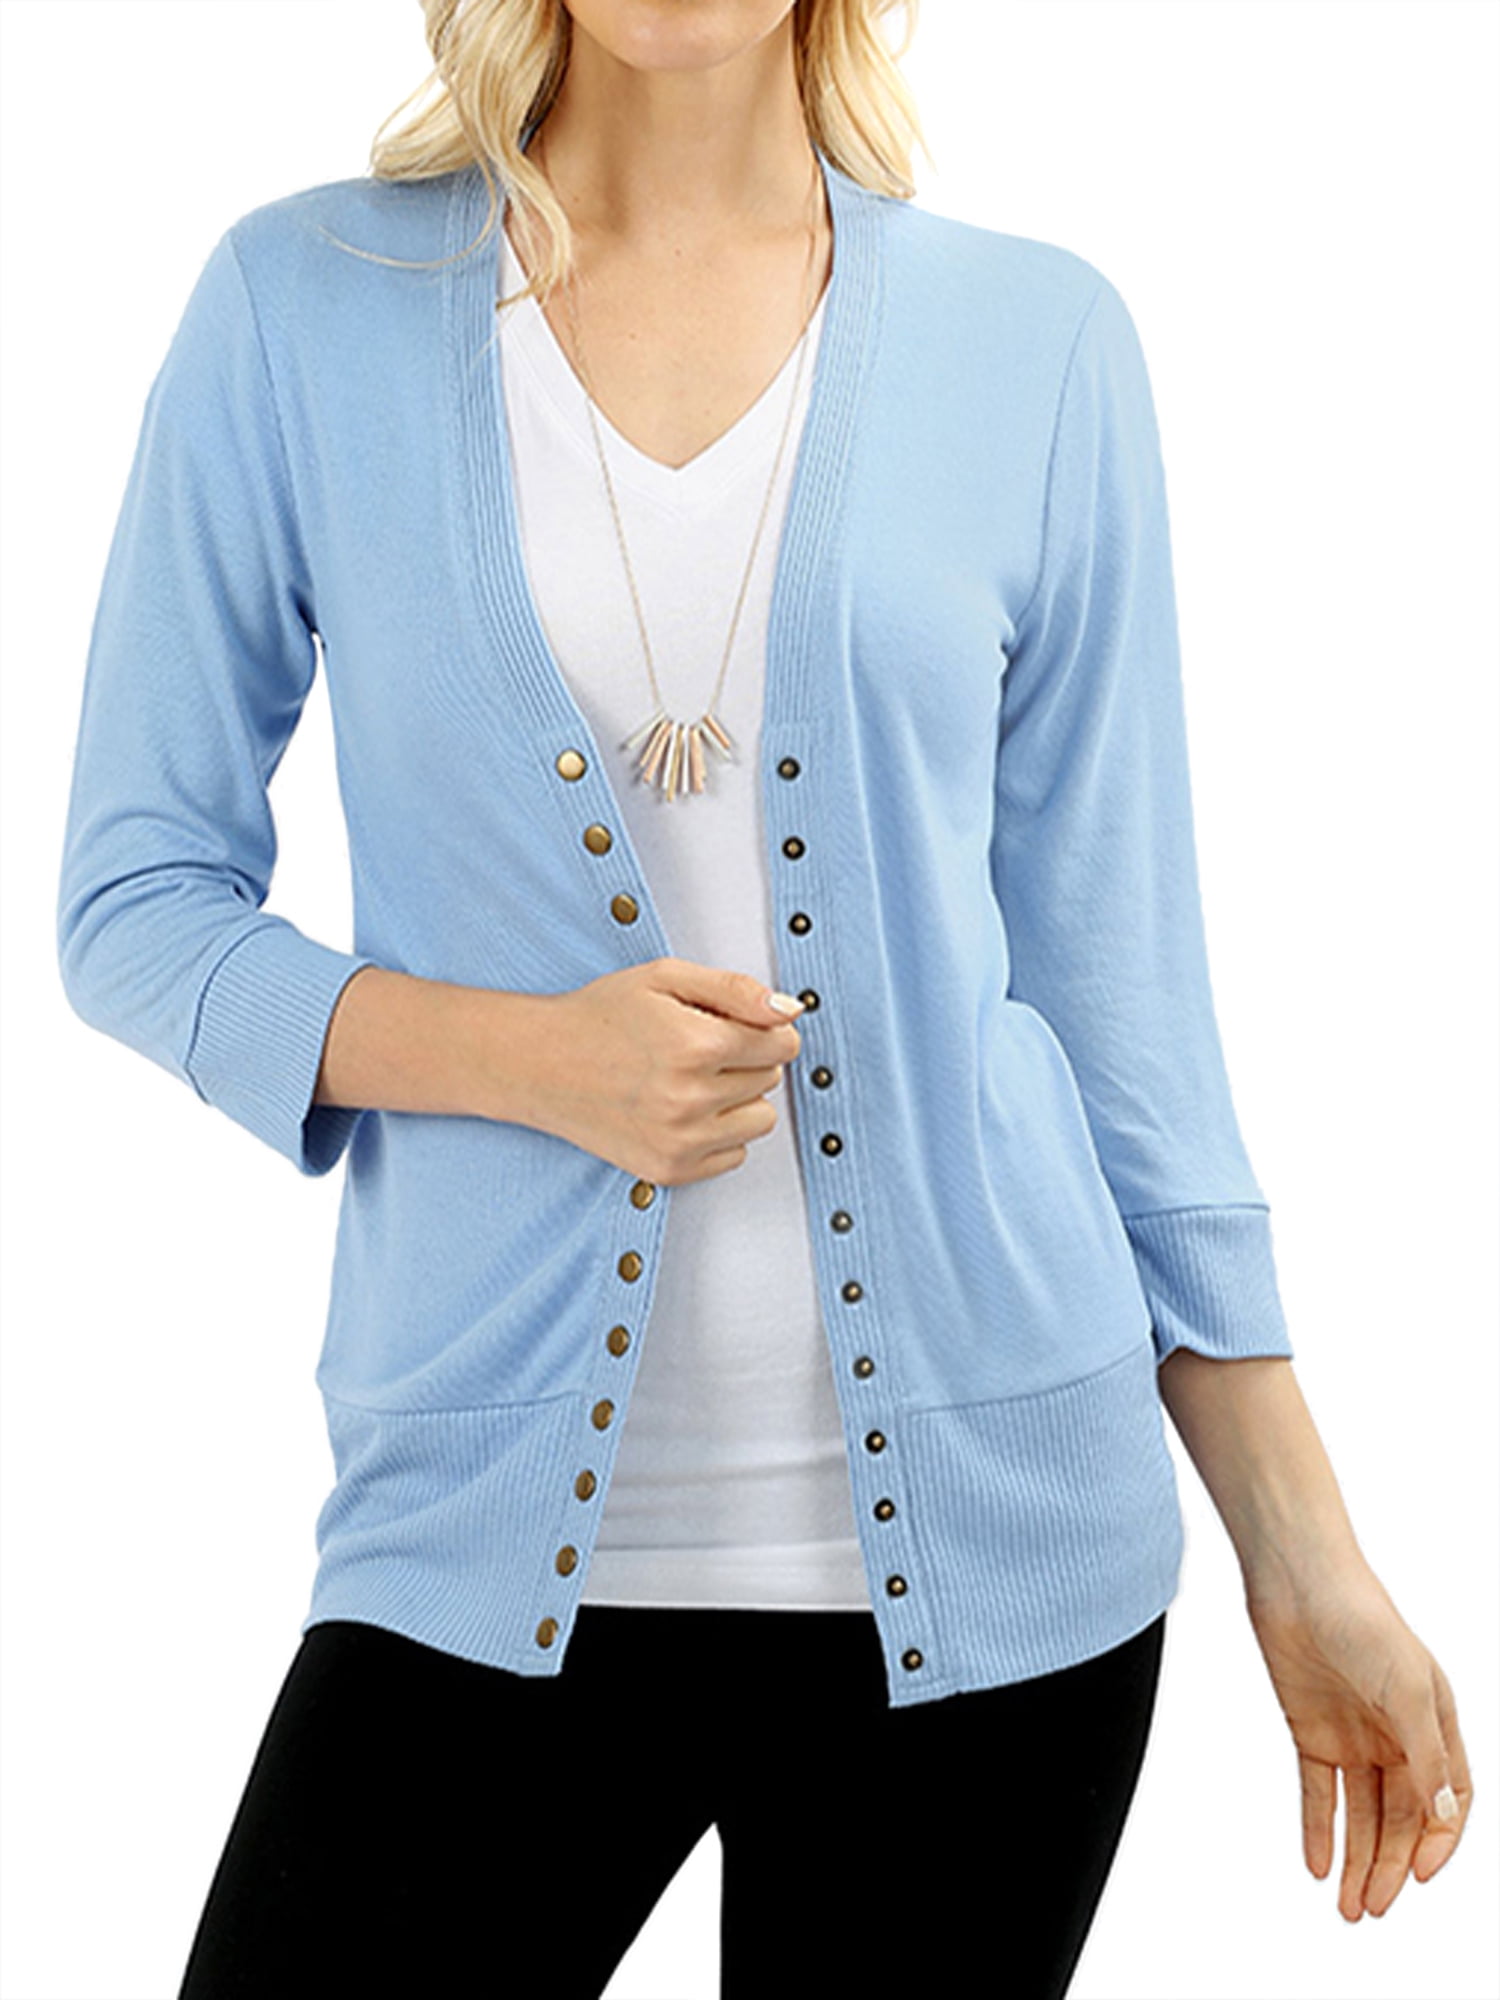 Hot Womens Classic Snap Button Front V-Neck 3/4 Sleeve Knit Cardigan Tops Blouse